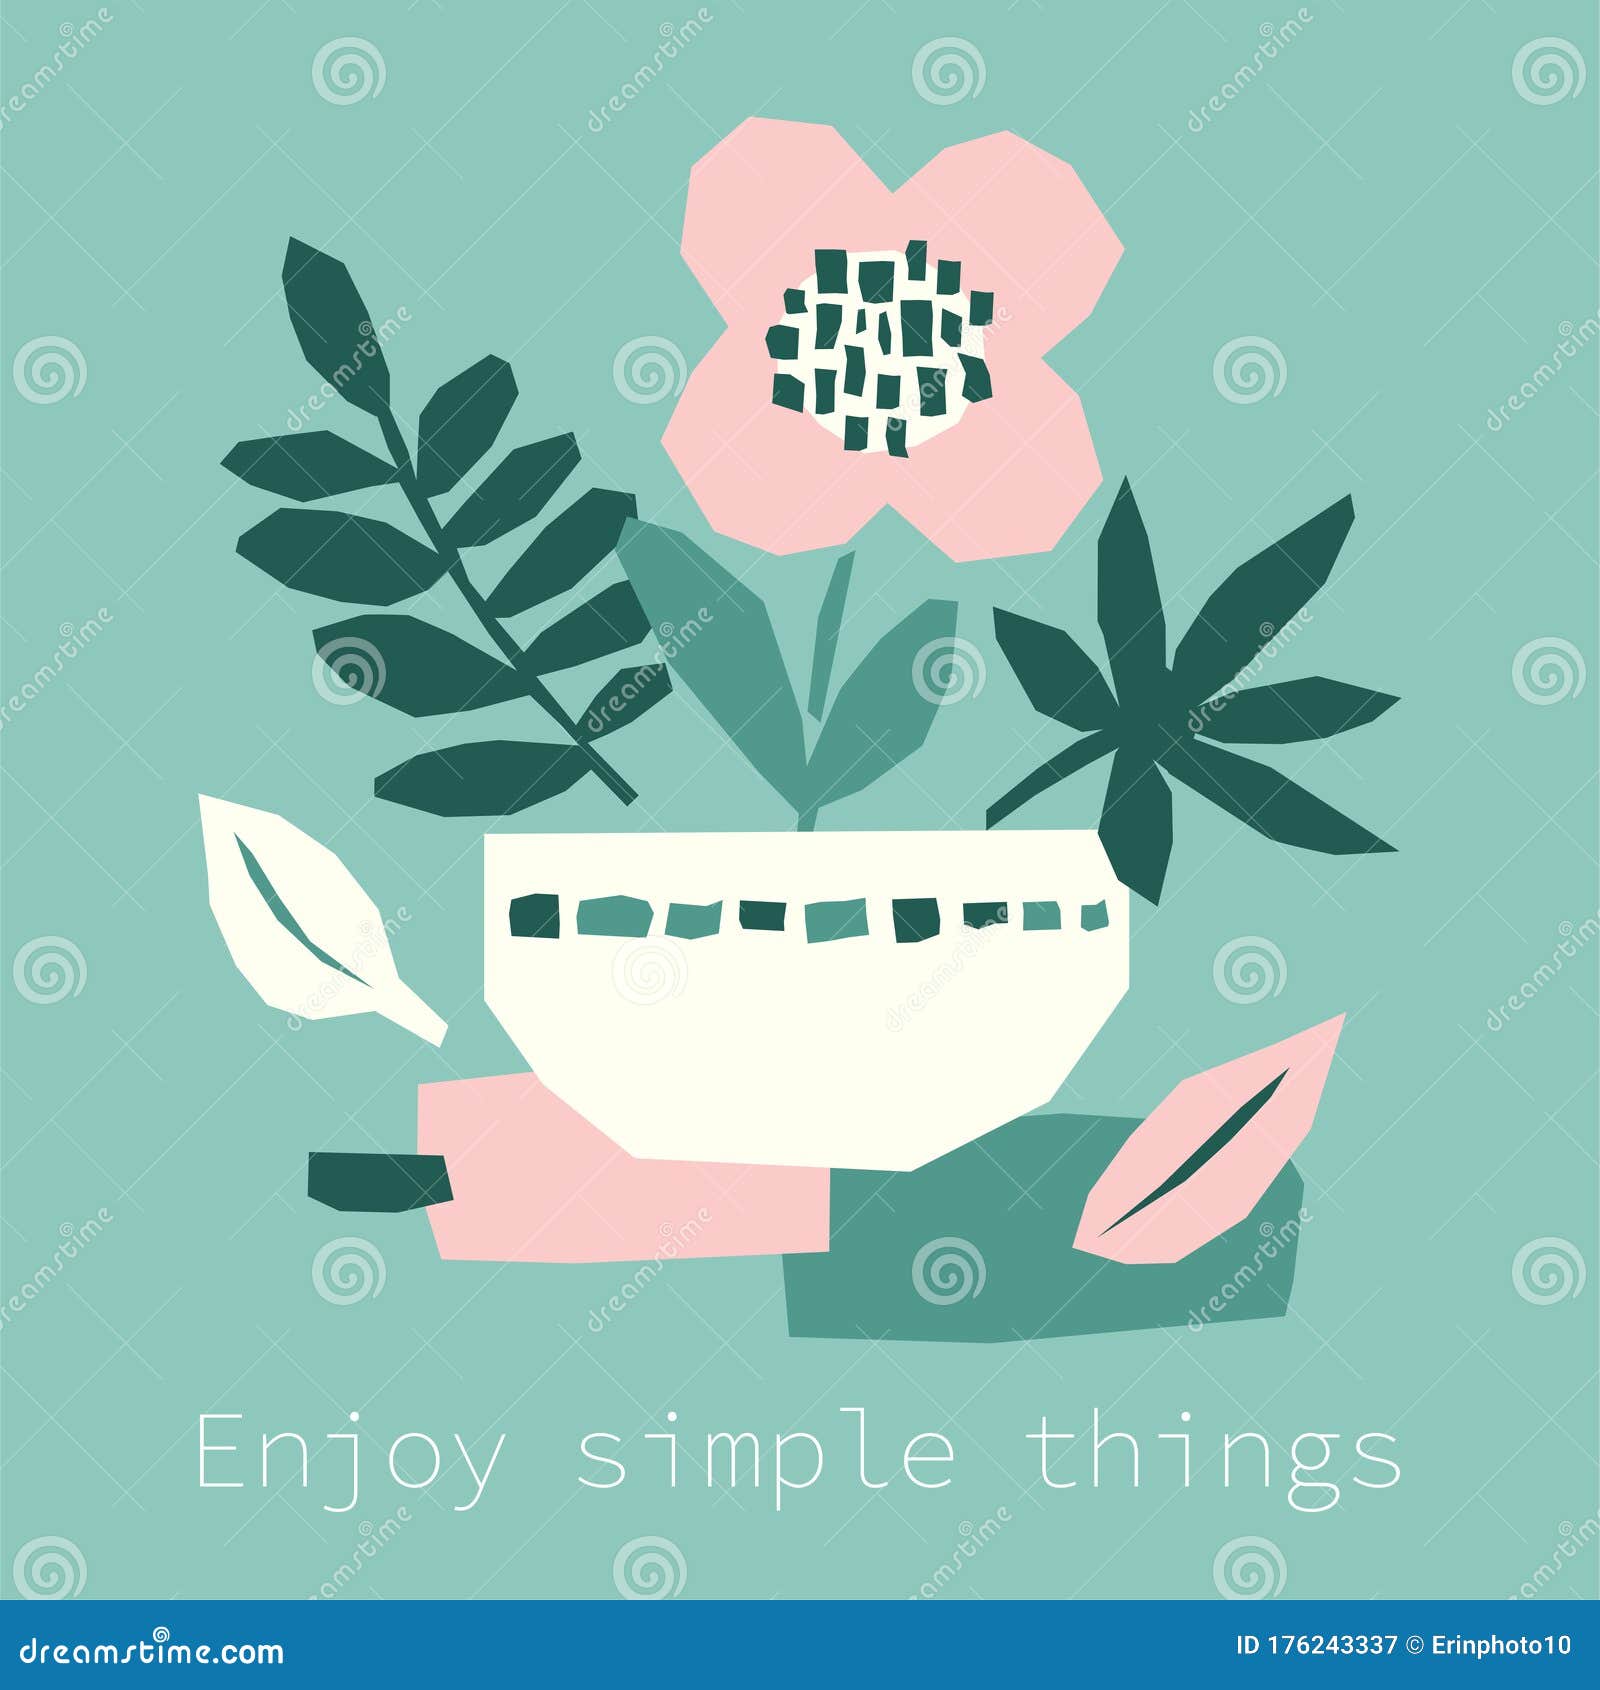 Download Every Day Motivation As Creative Trendy Abstract Paper Cut Out Collage Background For Social Media Templates Stock Vector Illustration Of Editable Modern 176243337